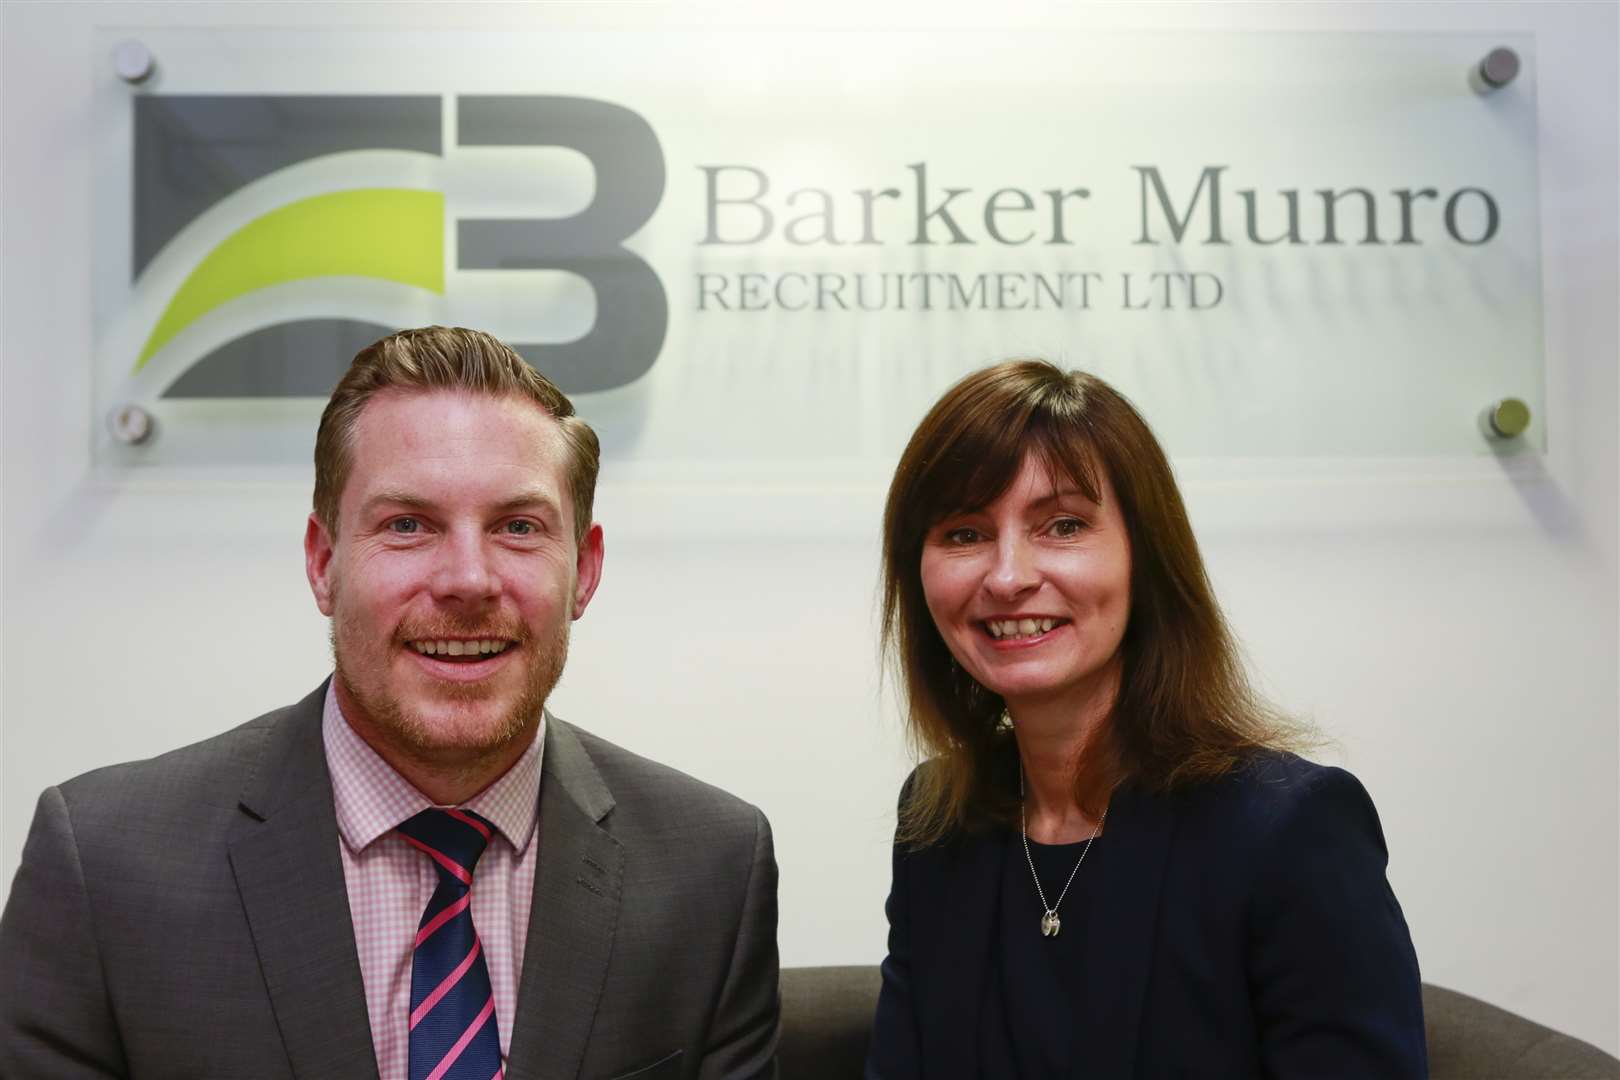 Dan Munday and Heather Parkhouse of Barker Munro